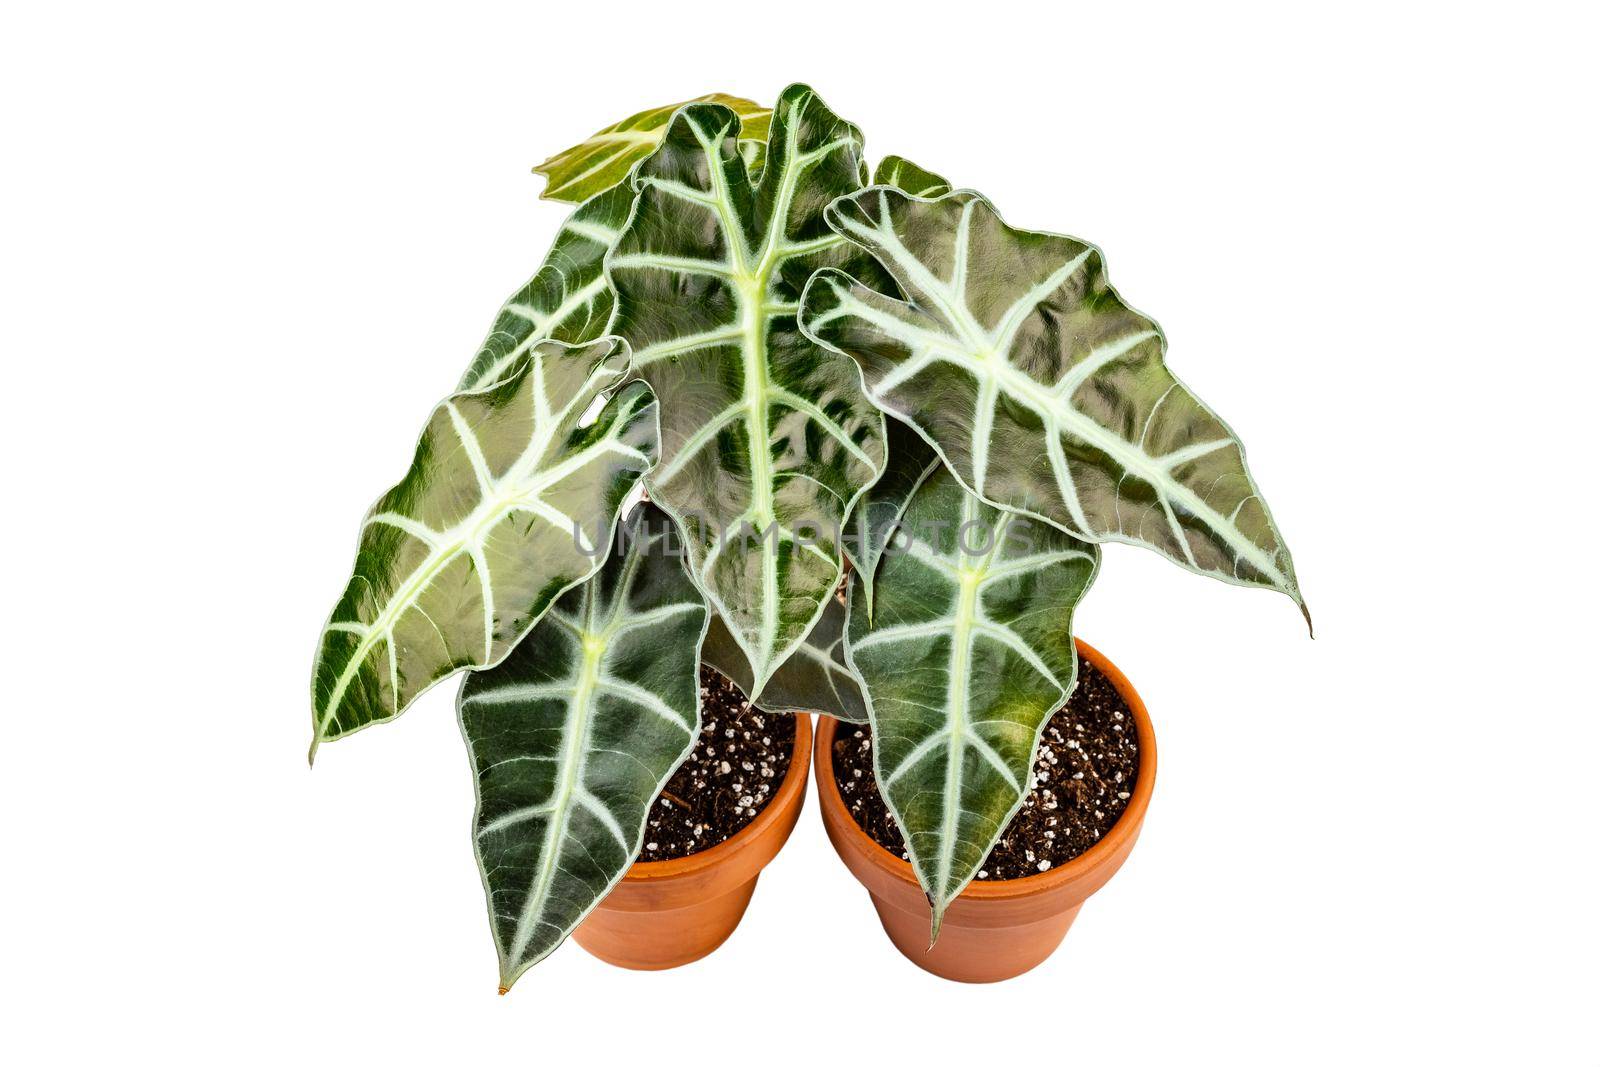 Alocasia Polly or Alocasia Amazonica and African Mask Plant potted plants isolated on white background